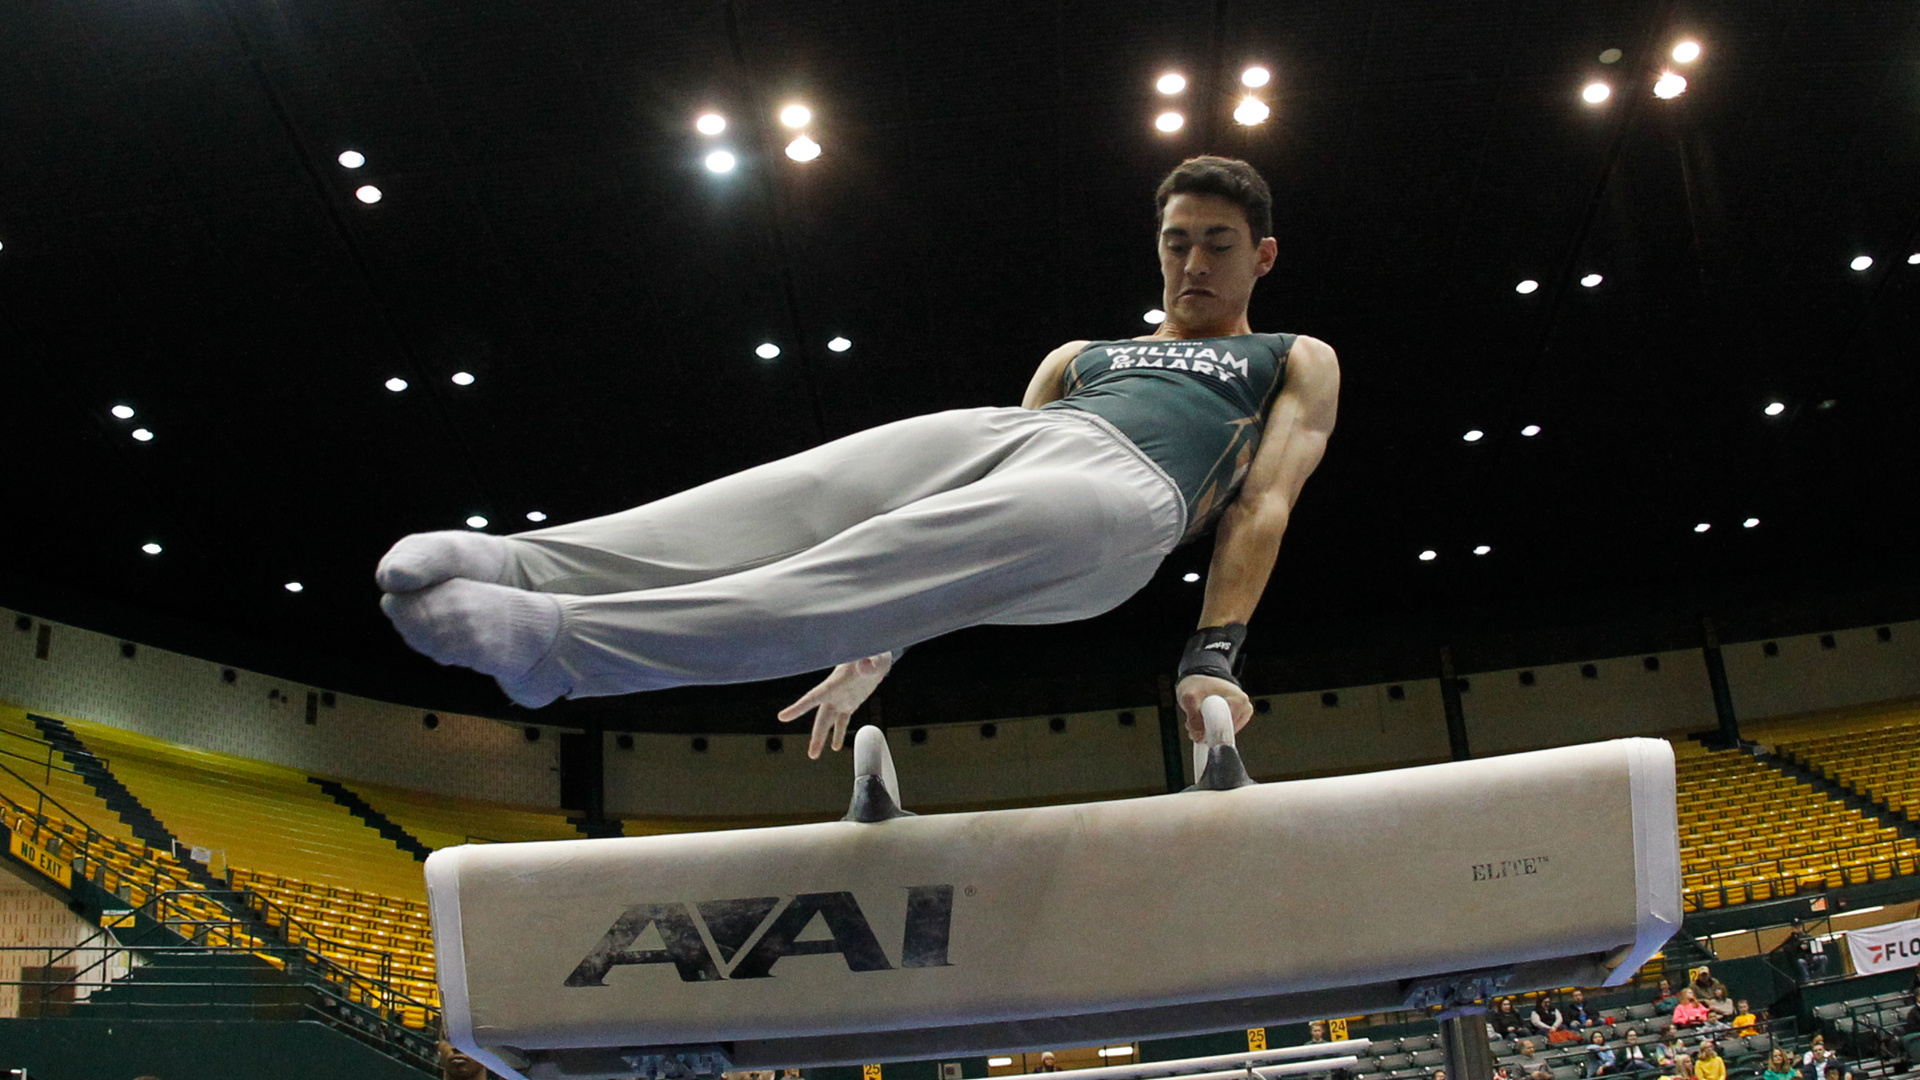 Pommel Horse (Gymnastics): Christian Gulotta, Individual qualifier on floor and pommel horse at the NCAA Championships. 1920x1080 Full HD Background.